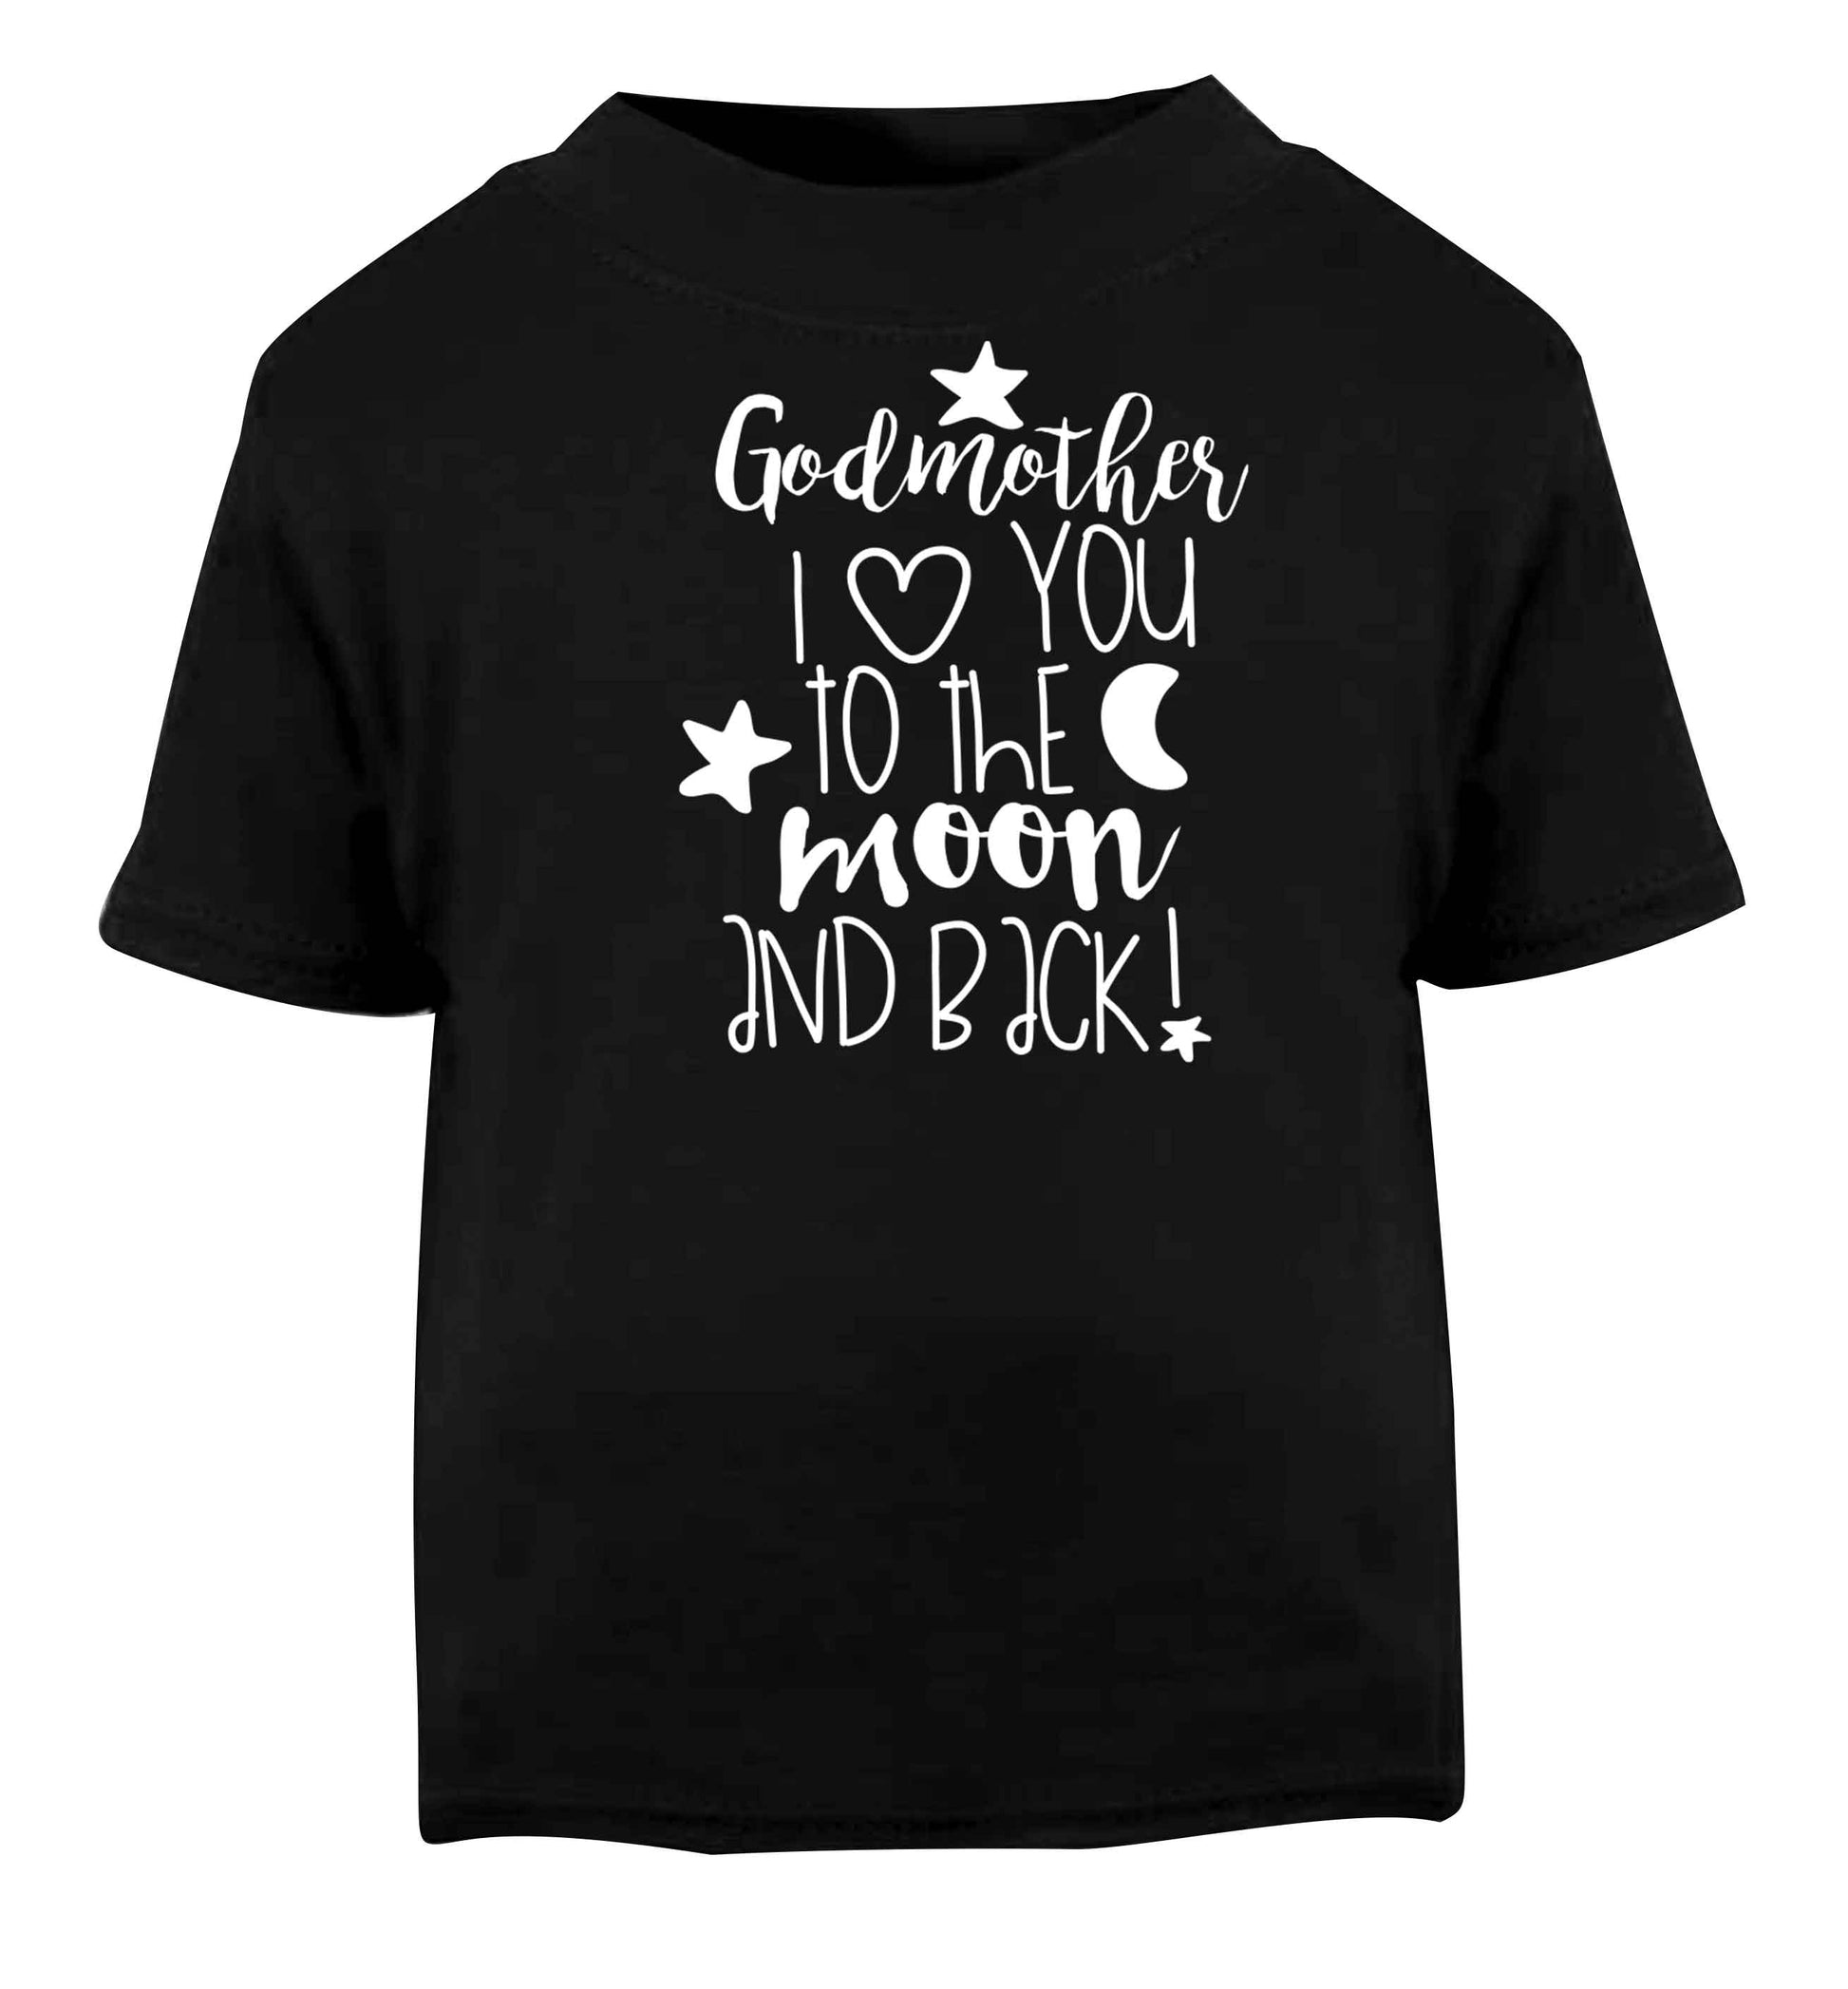 Godmother I love you to the moon and back Black baby toddler Tshirt 2 years